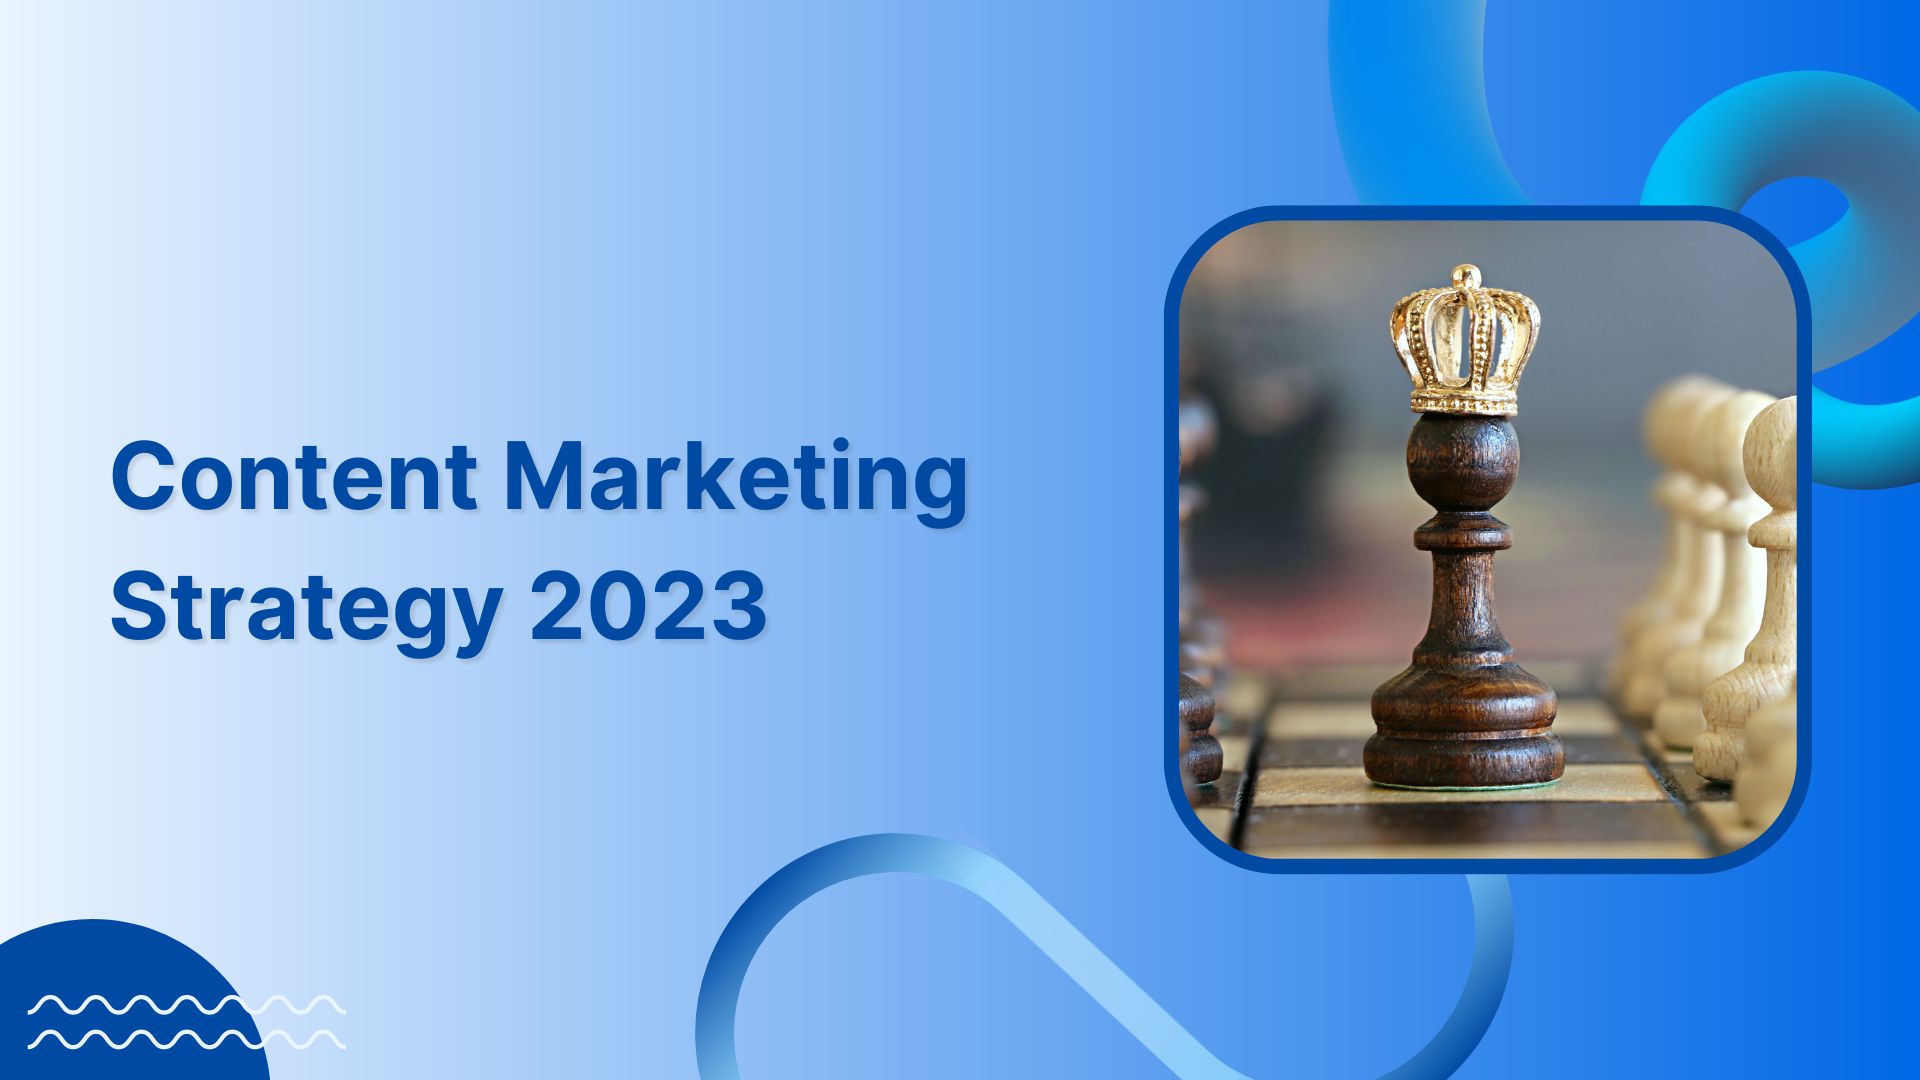 Content marketing strategy 2023